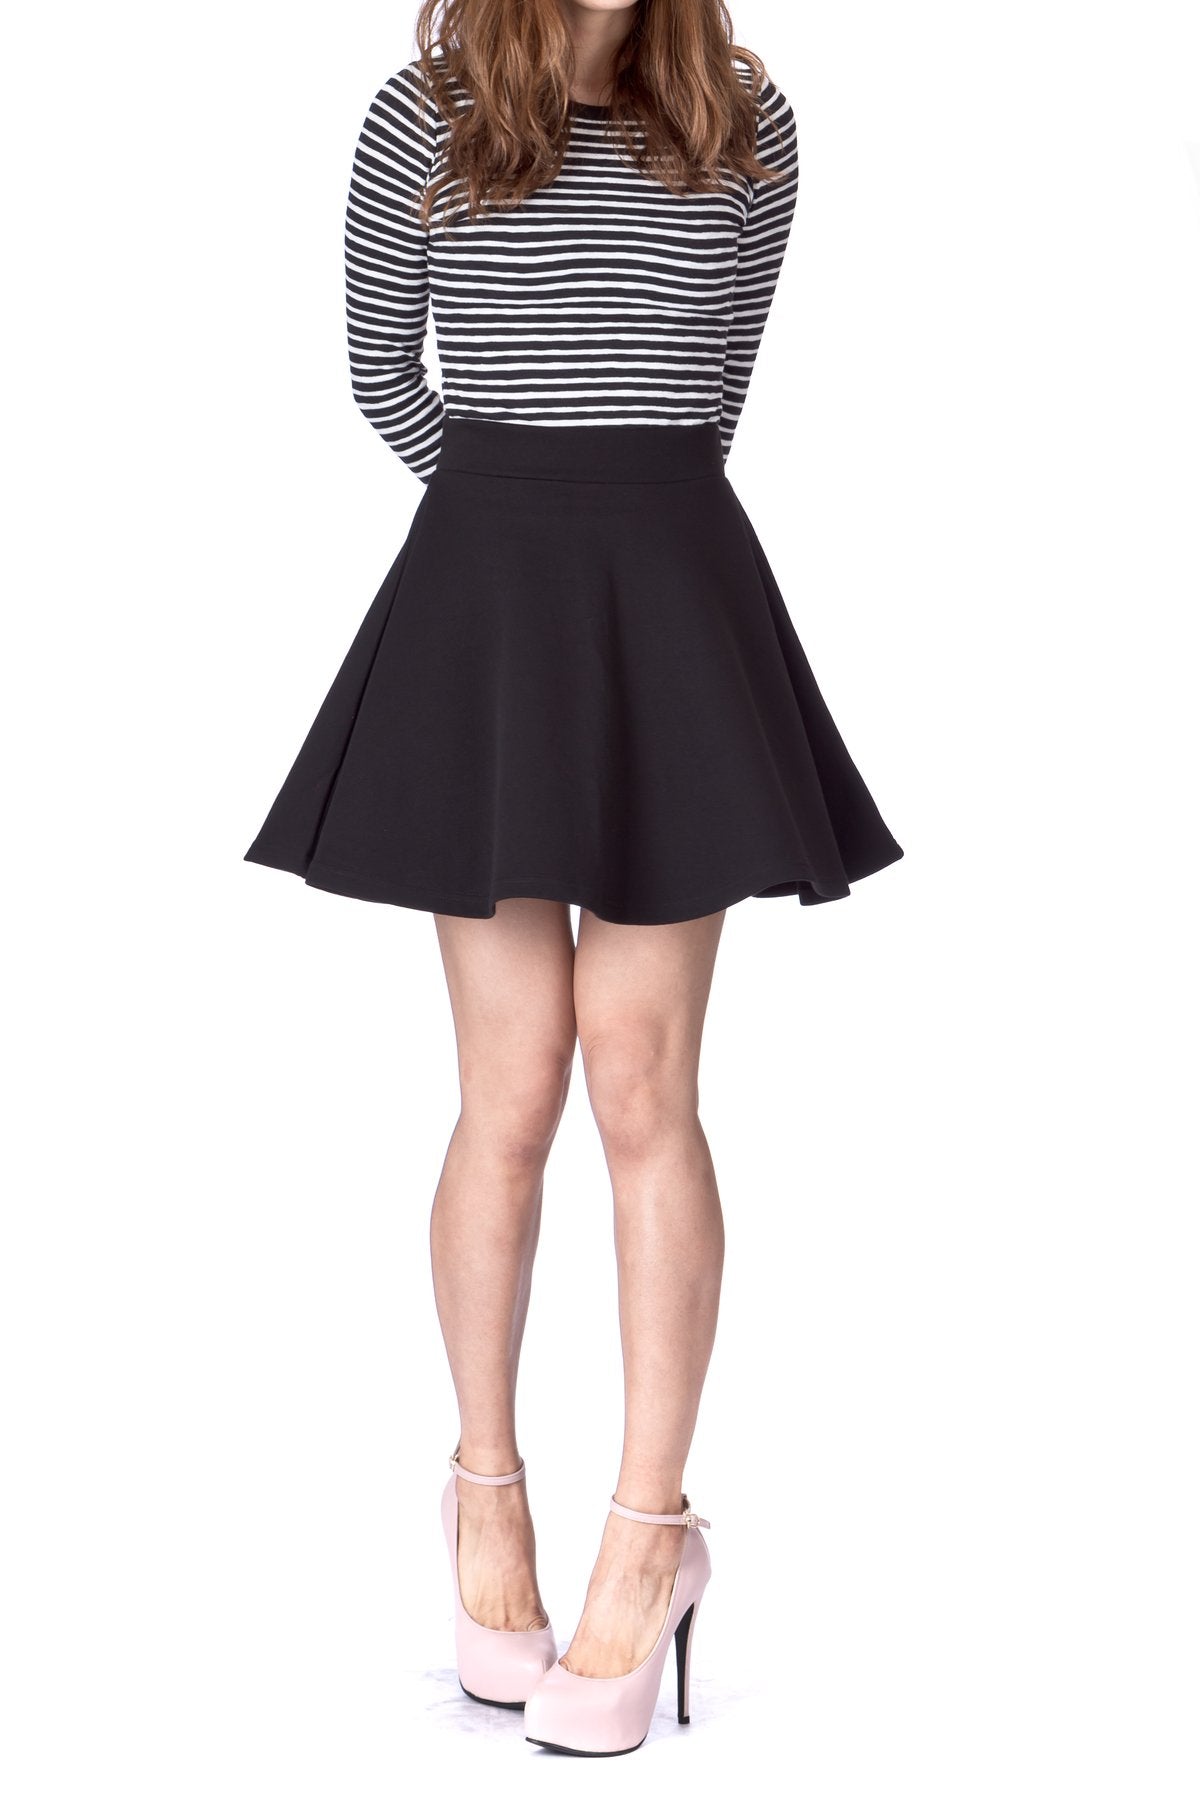 Women's Solid Faux Leather Flared Pleated Stretch Mini Skater Skirt -  Walmart.com